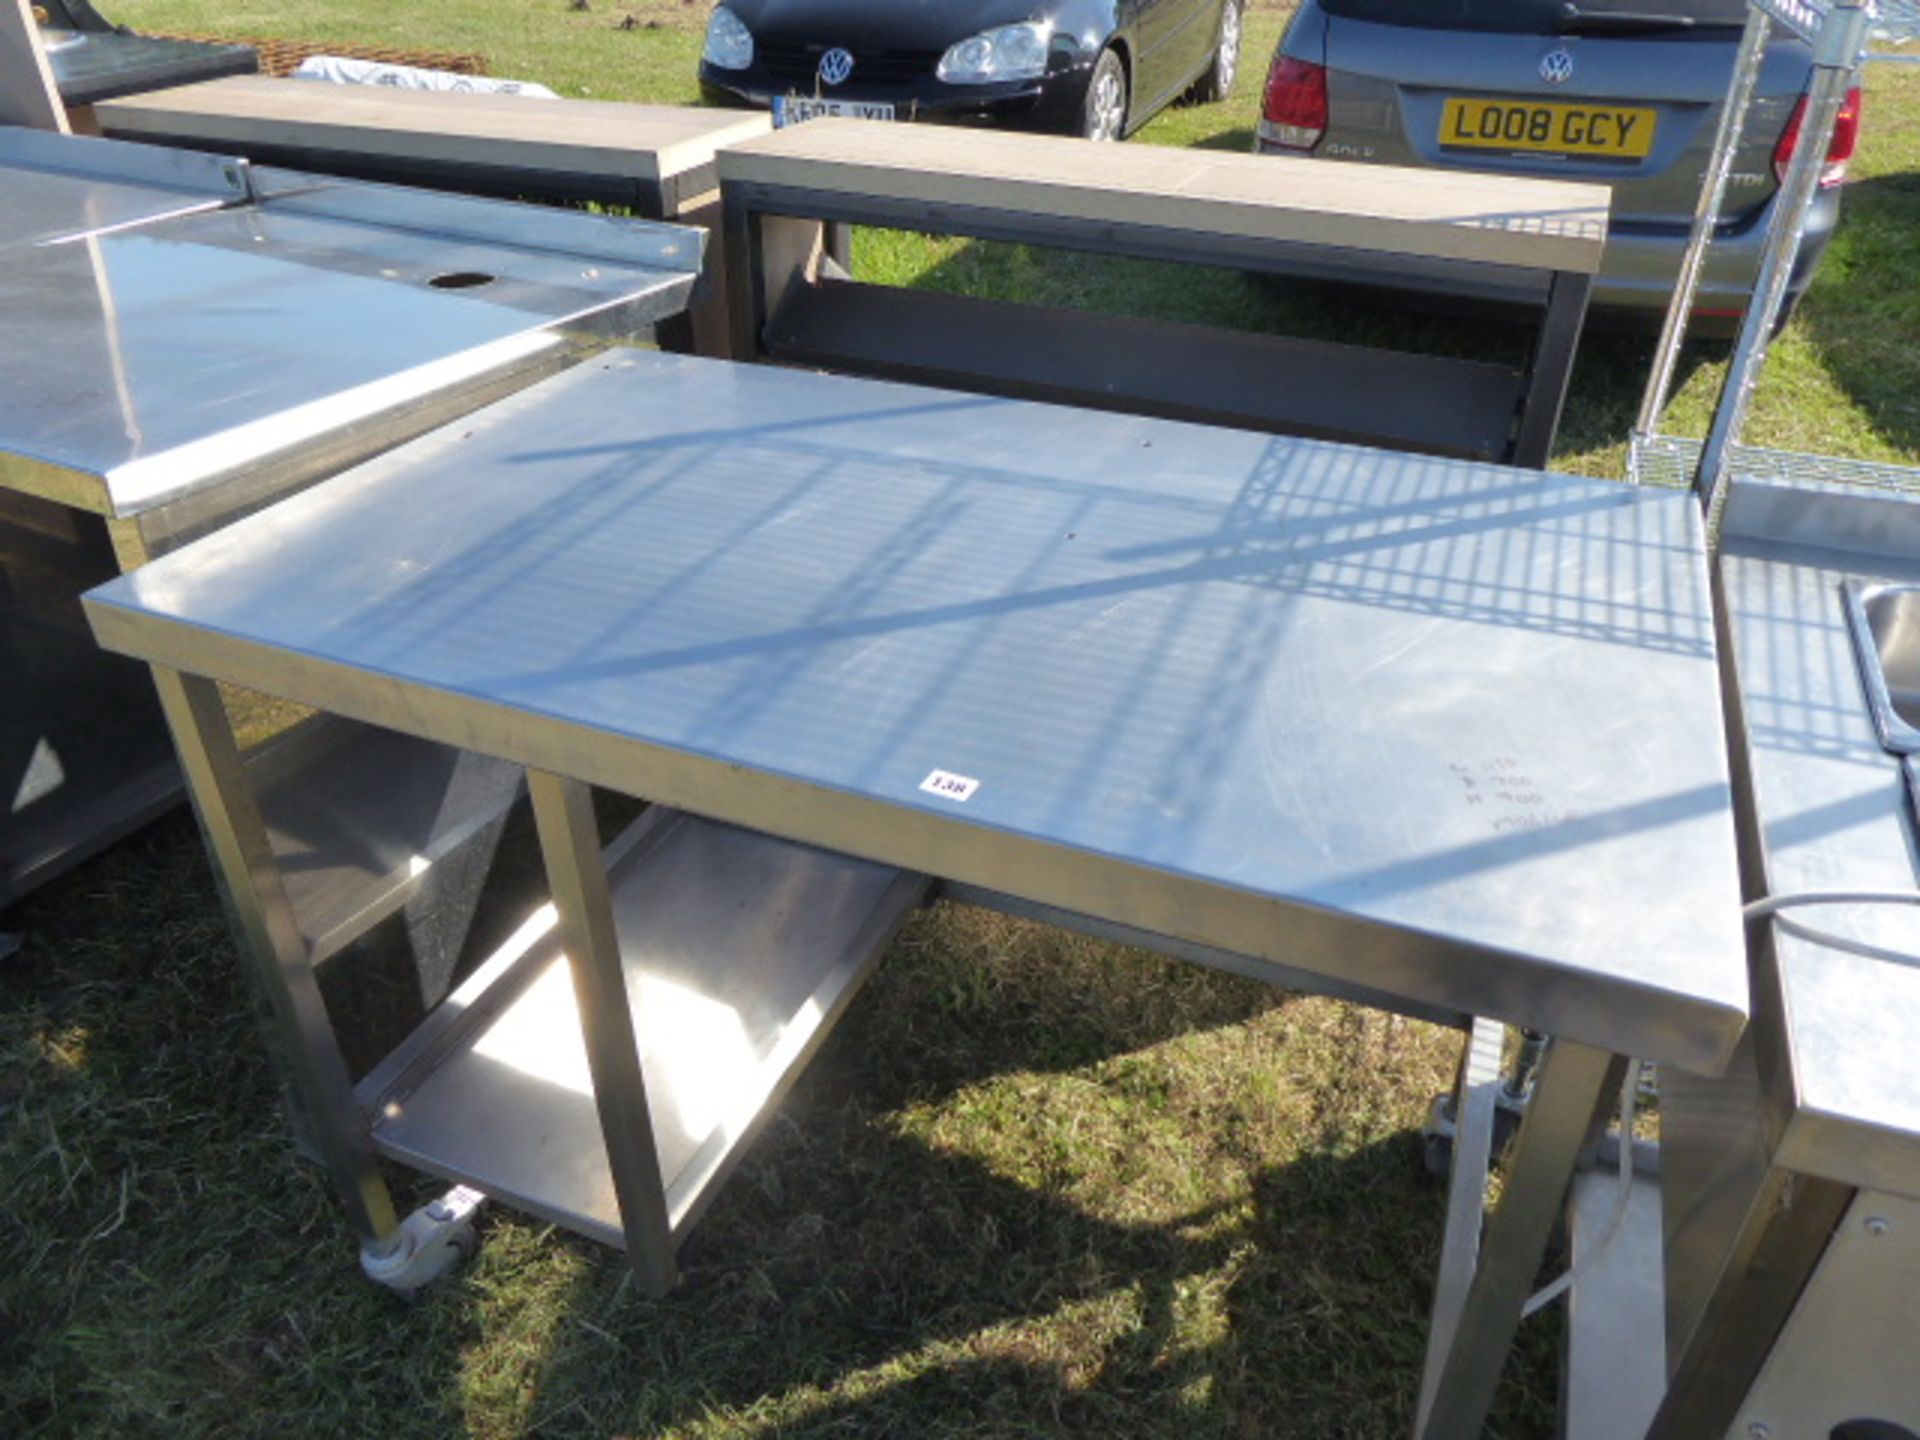 Mobile stainless steel preparation table with void under and shelf under, 1150mm wide, 700mm deep